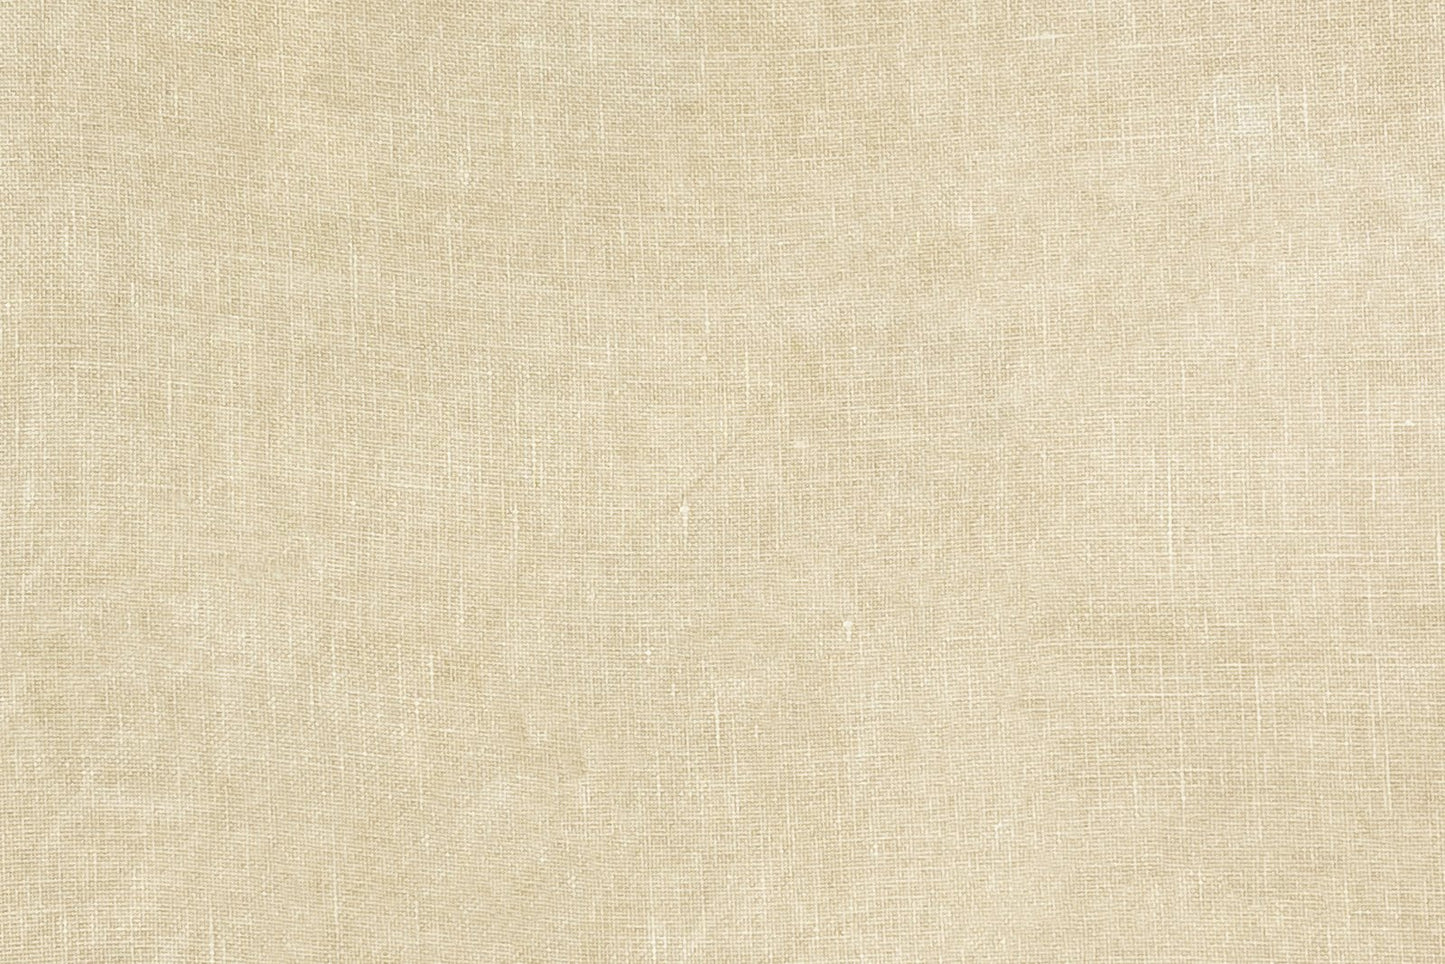 Aged Paper - Newcastle 40 ct Linen